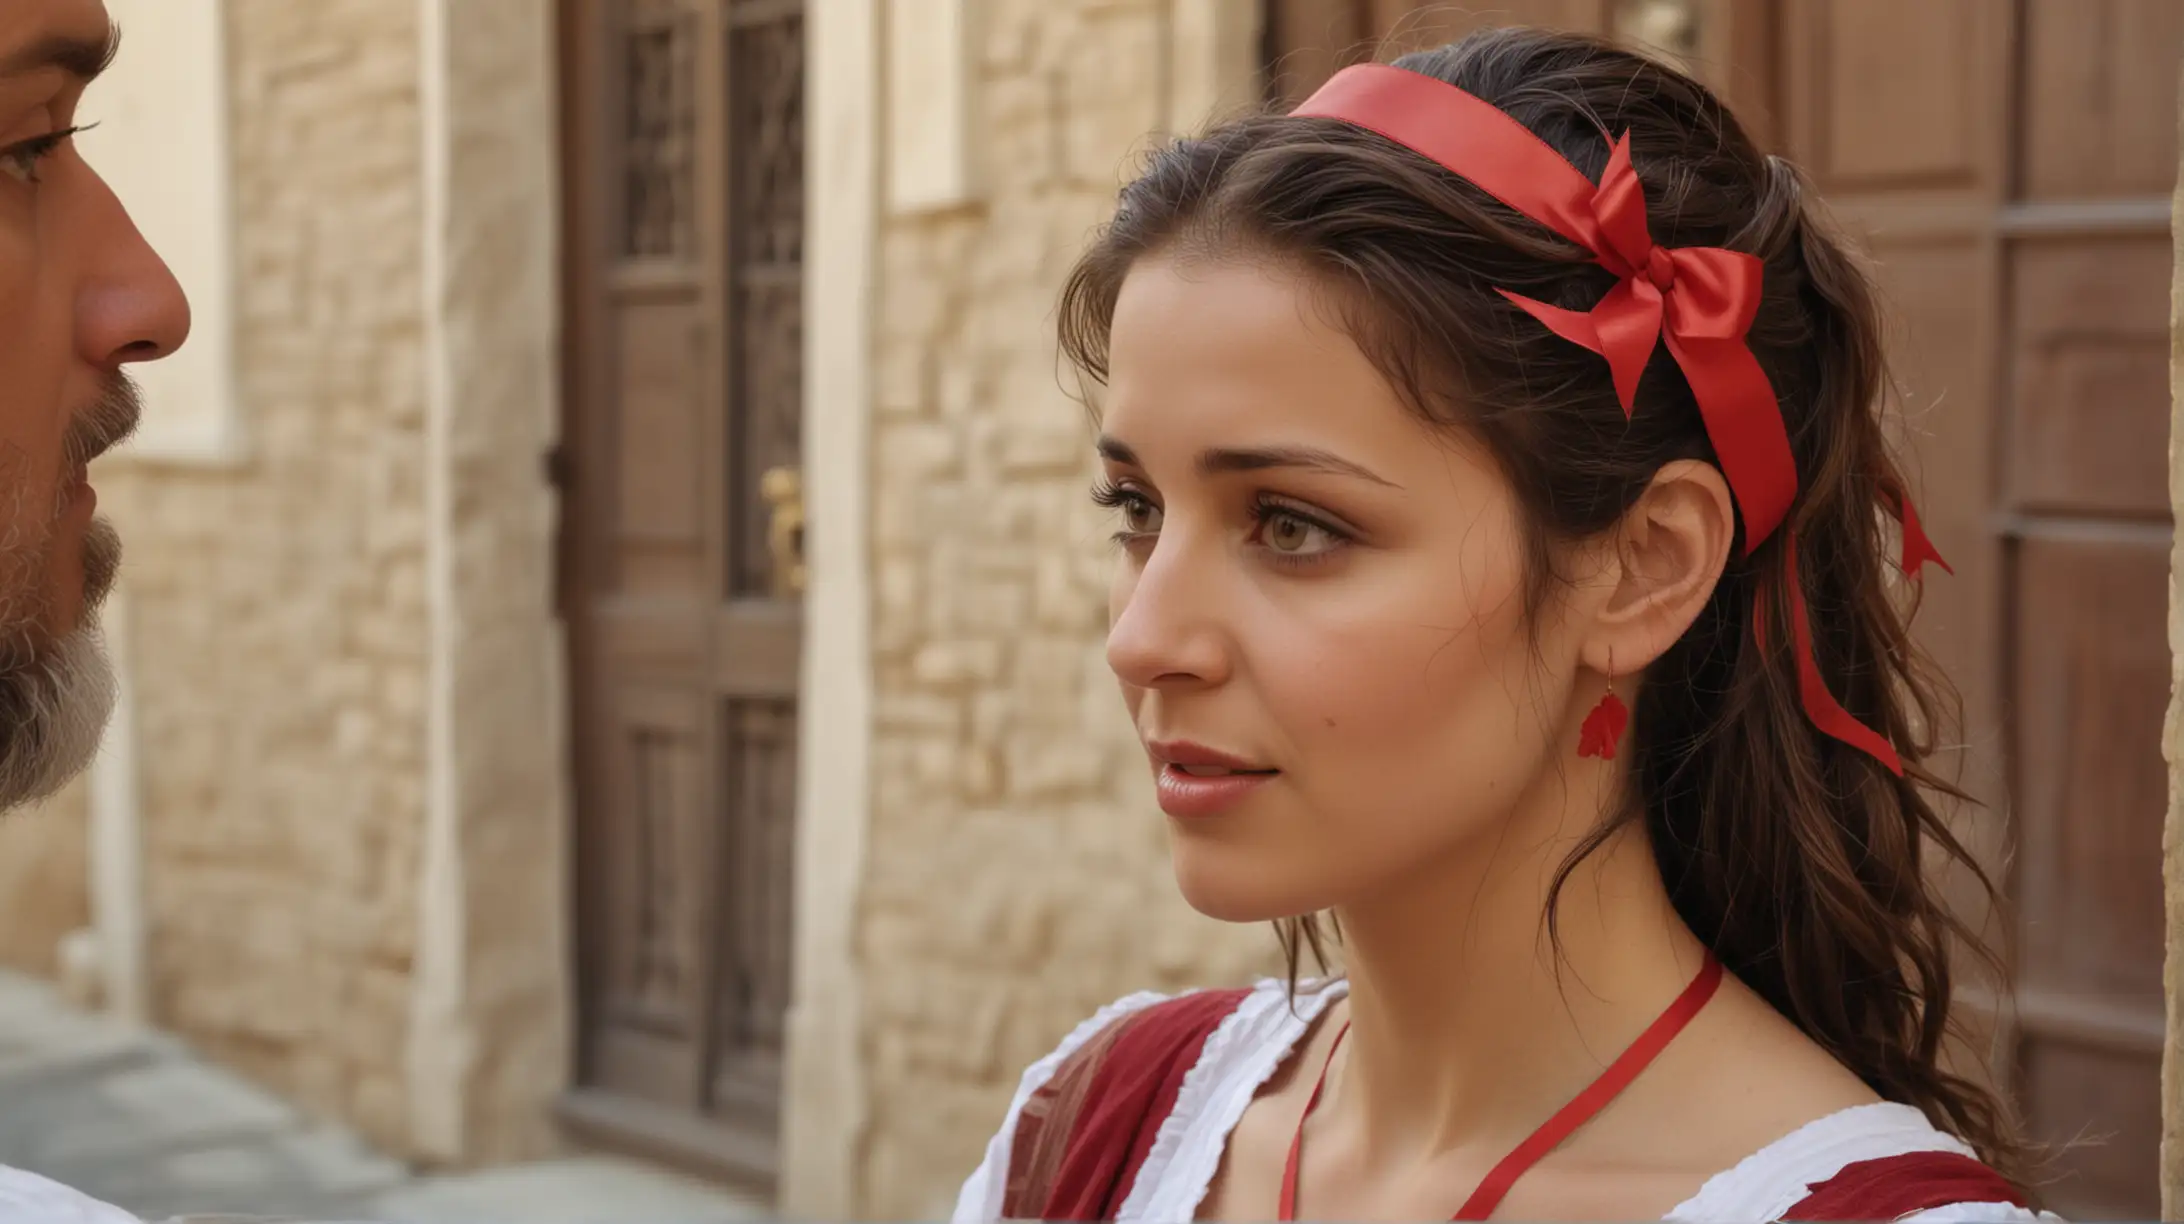 a close up of an attractive woman with a red ribbon in her hair, talking to 2 men on the street outside her house.  Set during the Biblical era of Moses, in the Middle East.